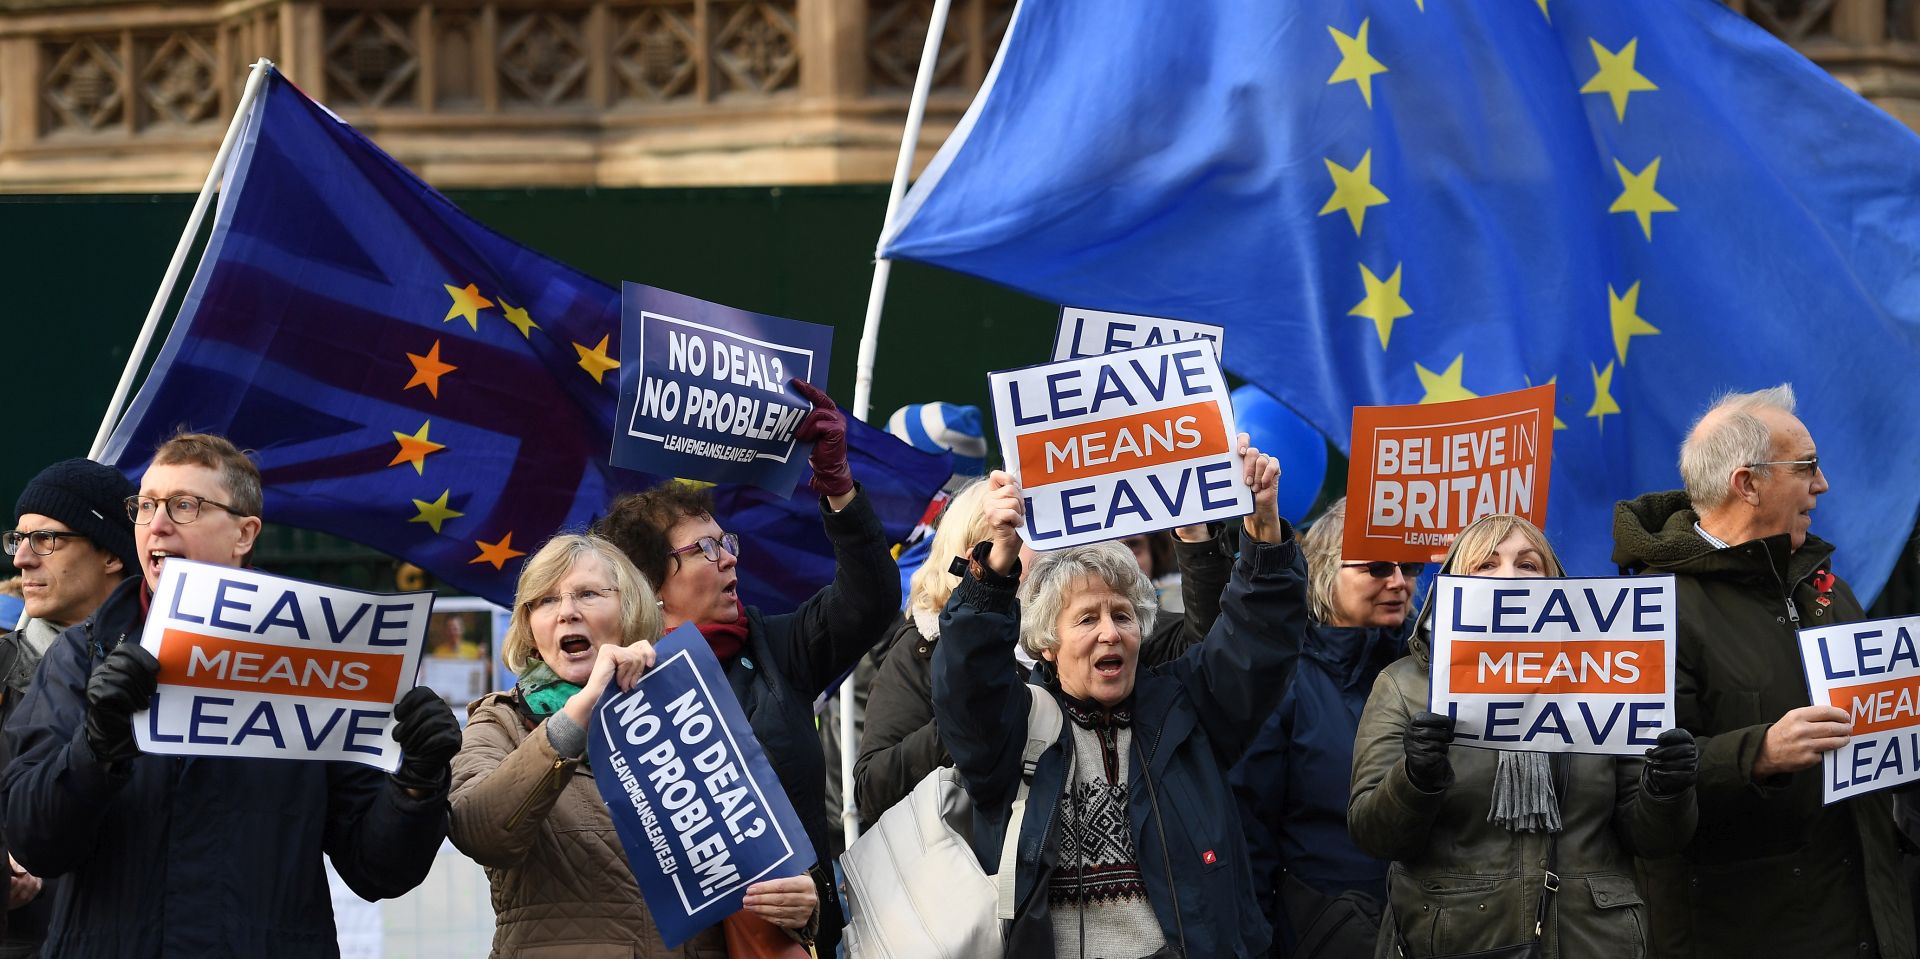 epa07209825 Pro-Brexit demonstrate outside parliament in London, Britain, 05 December 2018. Prime Minister Theresa May is holding five days of debate over Brexit at parliament hoping to persuade MP's to vote for her deal.  EPA/ANDY RAIN